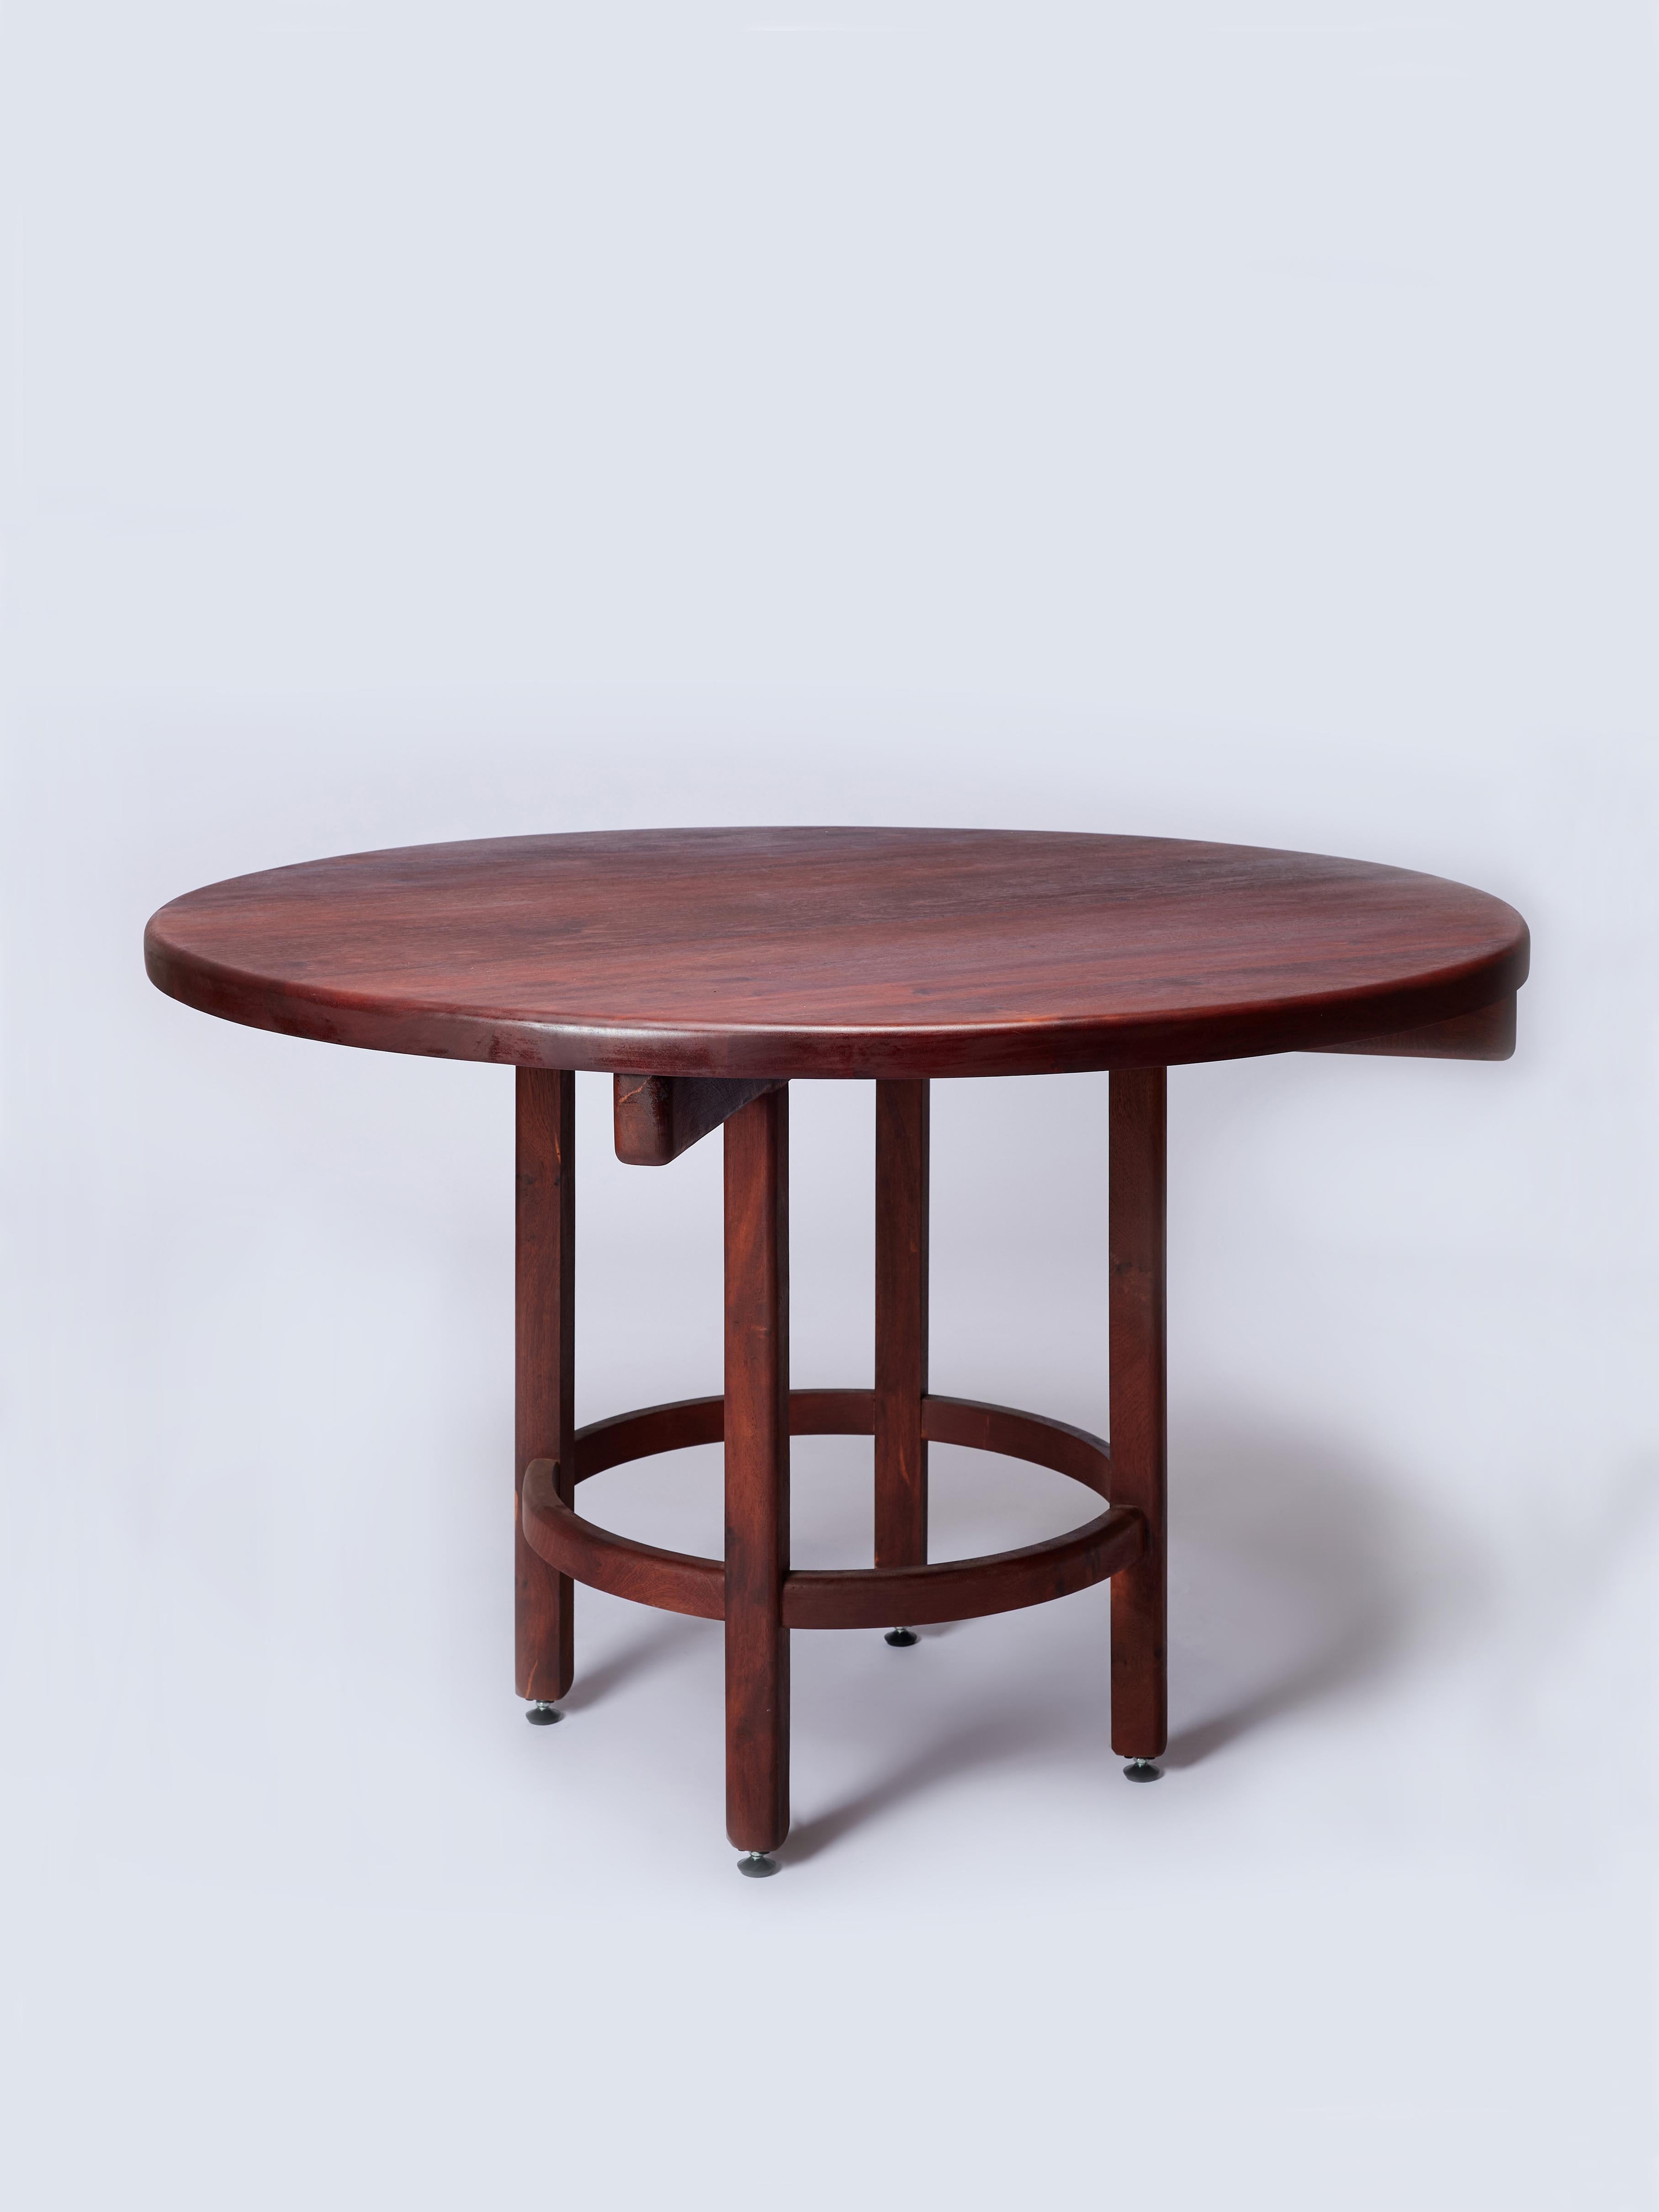 The Orno round dining table is part of the Orno collection, our first to be entirely made of hardwood. All pieces were designed under a same construction system that consists of basic structural elements –columns, beams, support planes– and whose